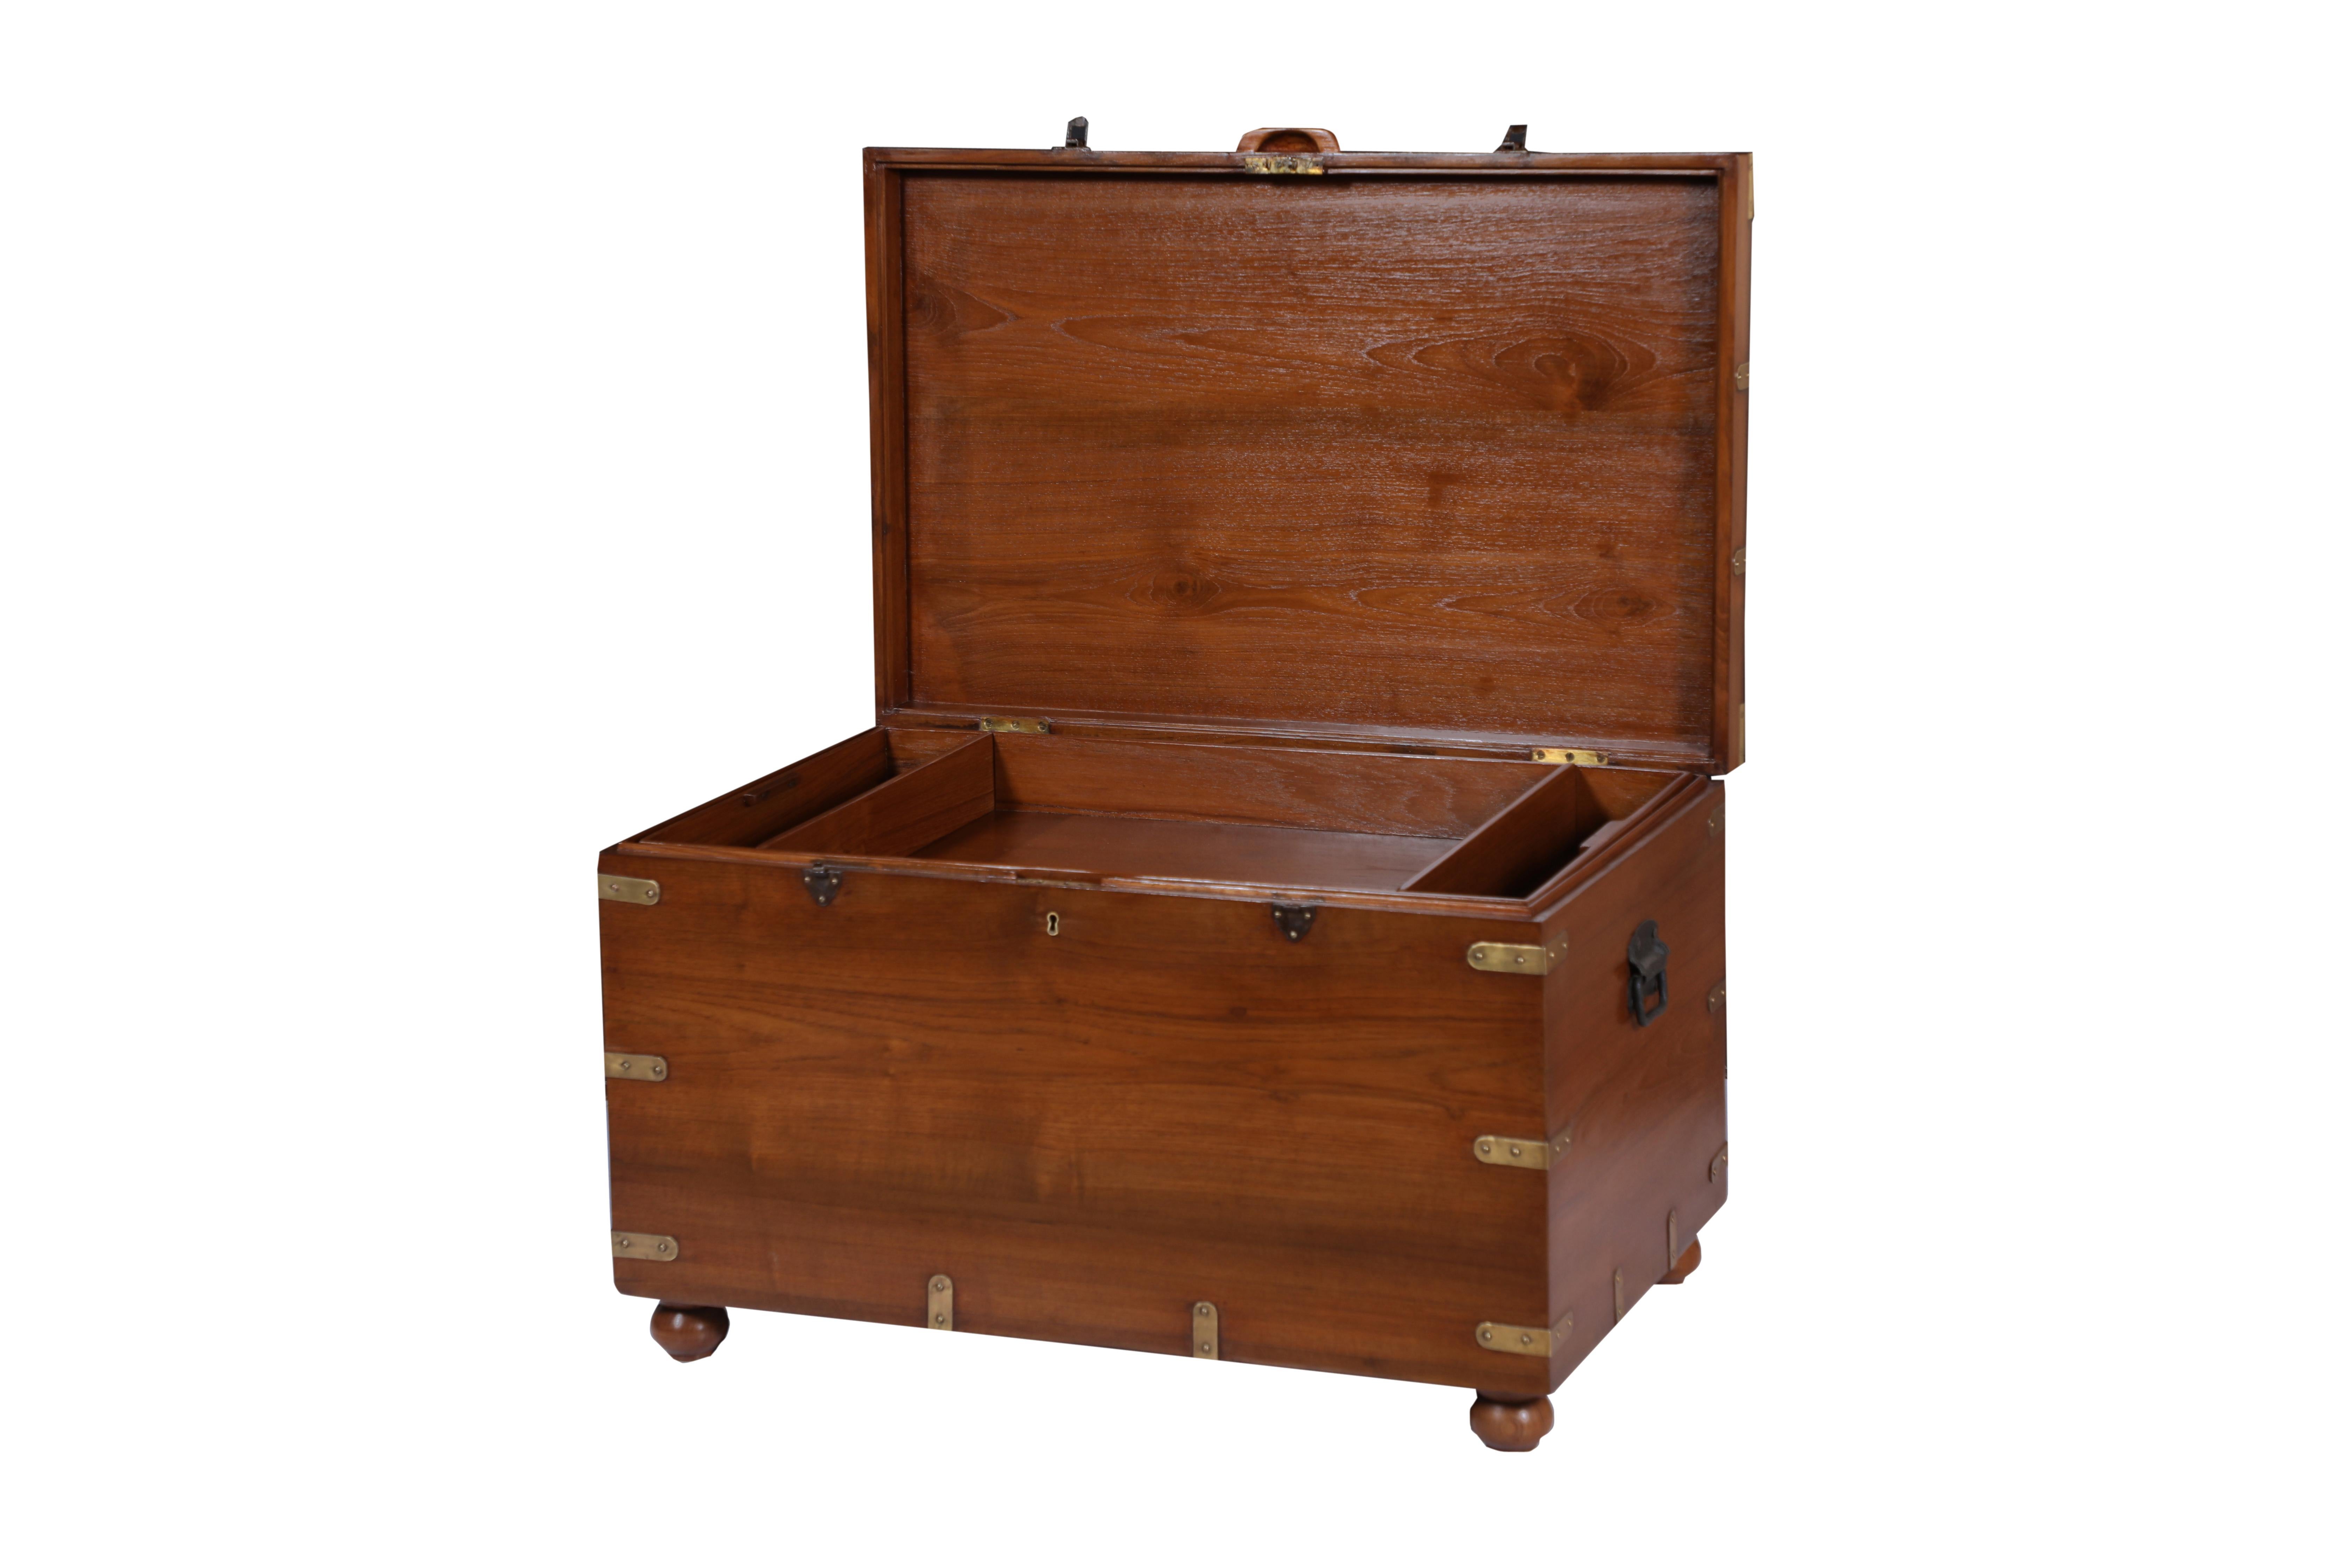 Large Teak British Campaign Blanket Chest Trunk In Good Condition For Sale In Nantucket, MA